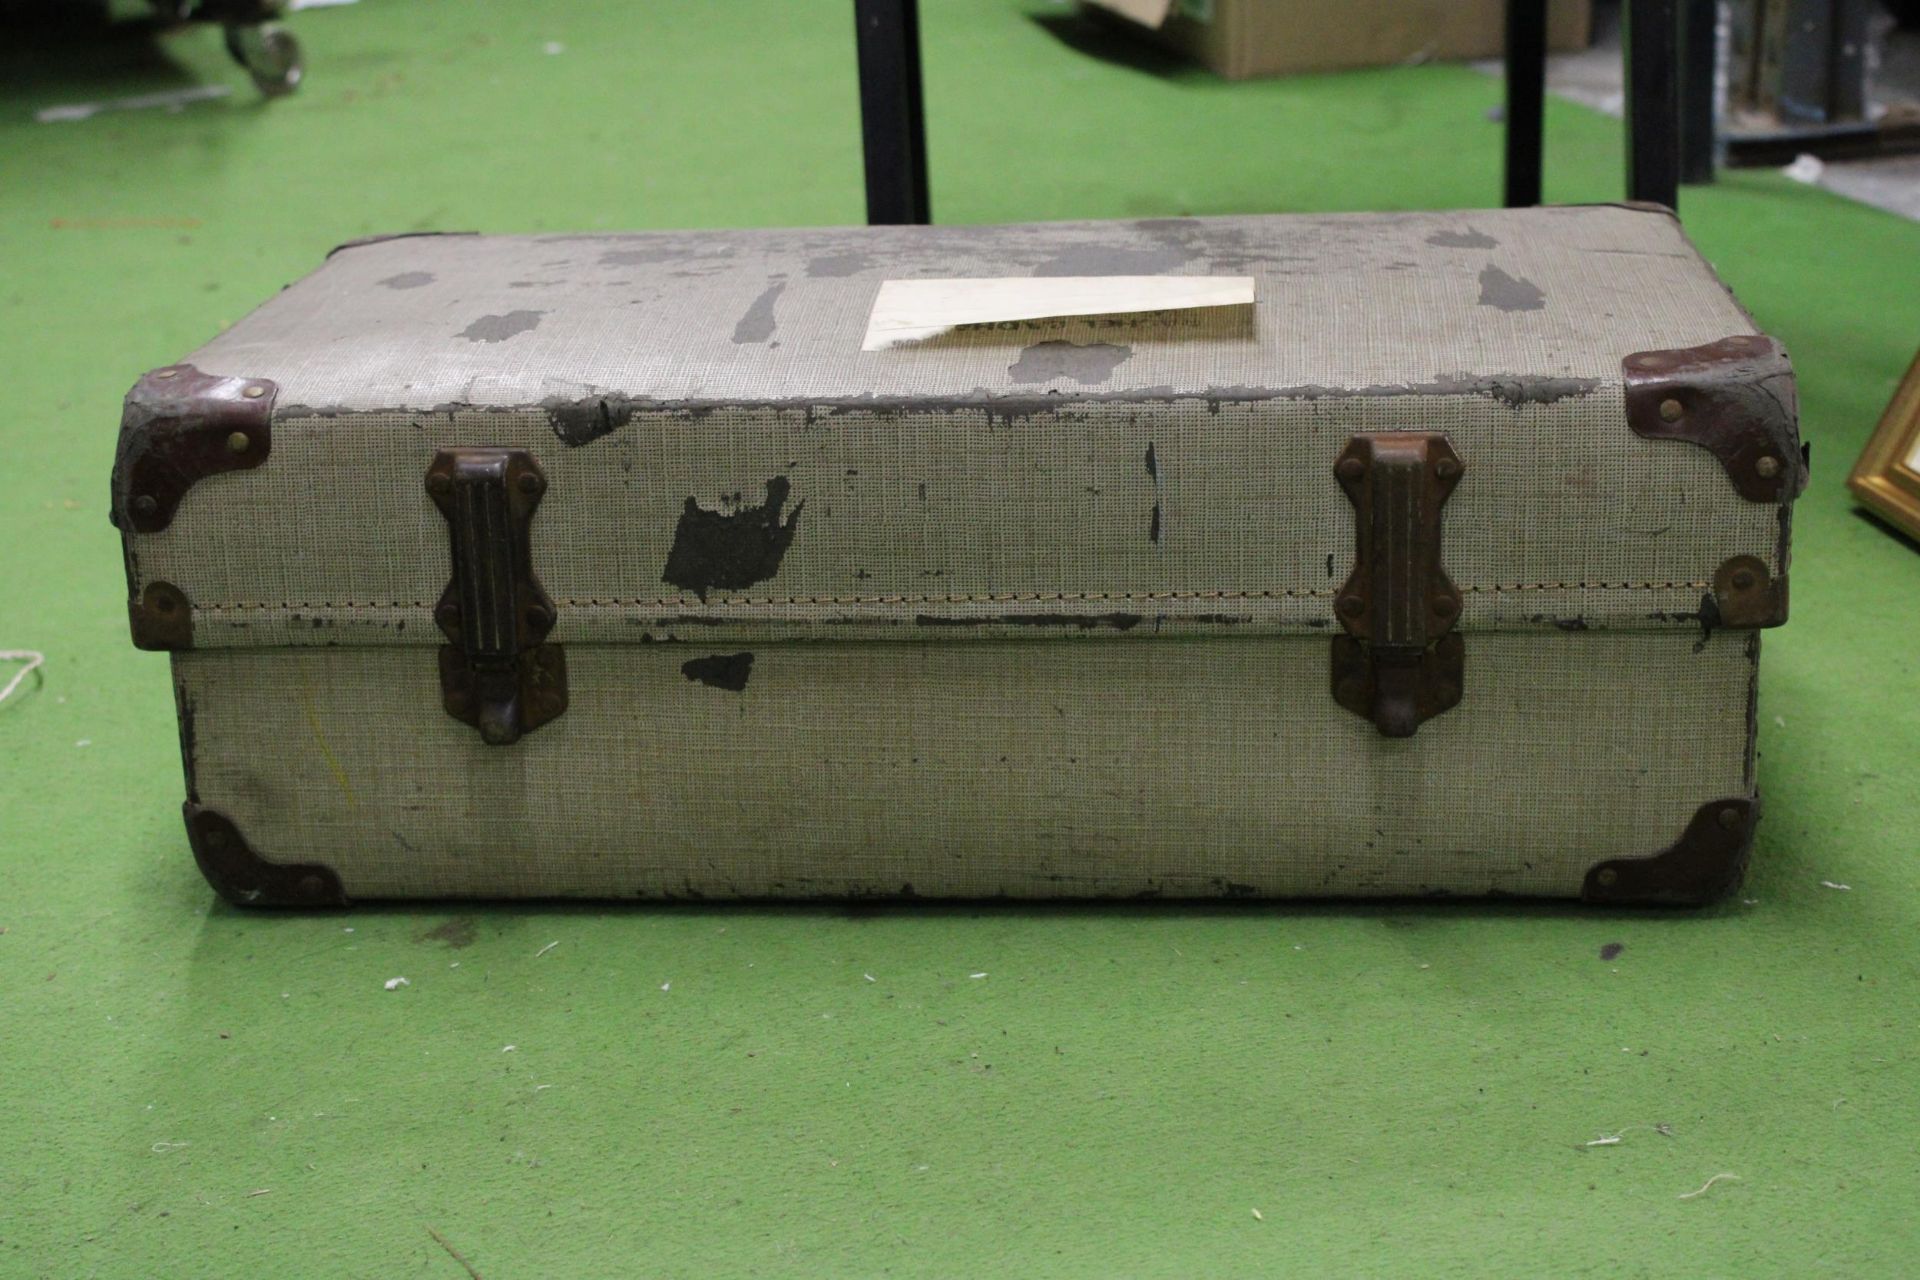 A VINTAGE SUITCASE - Image 3 of 3